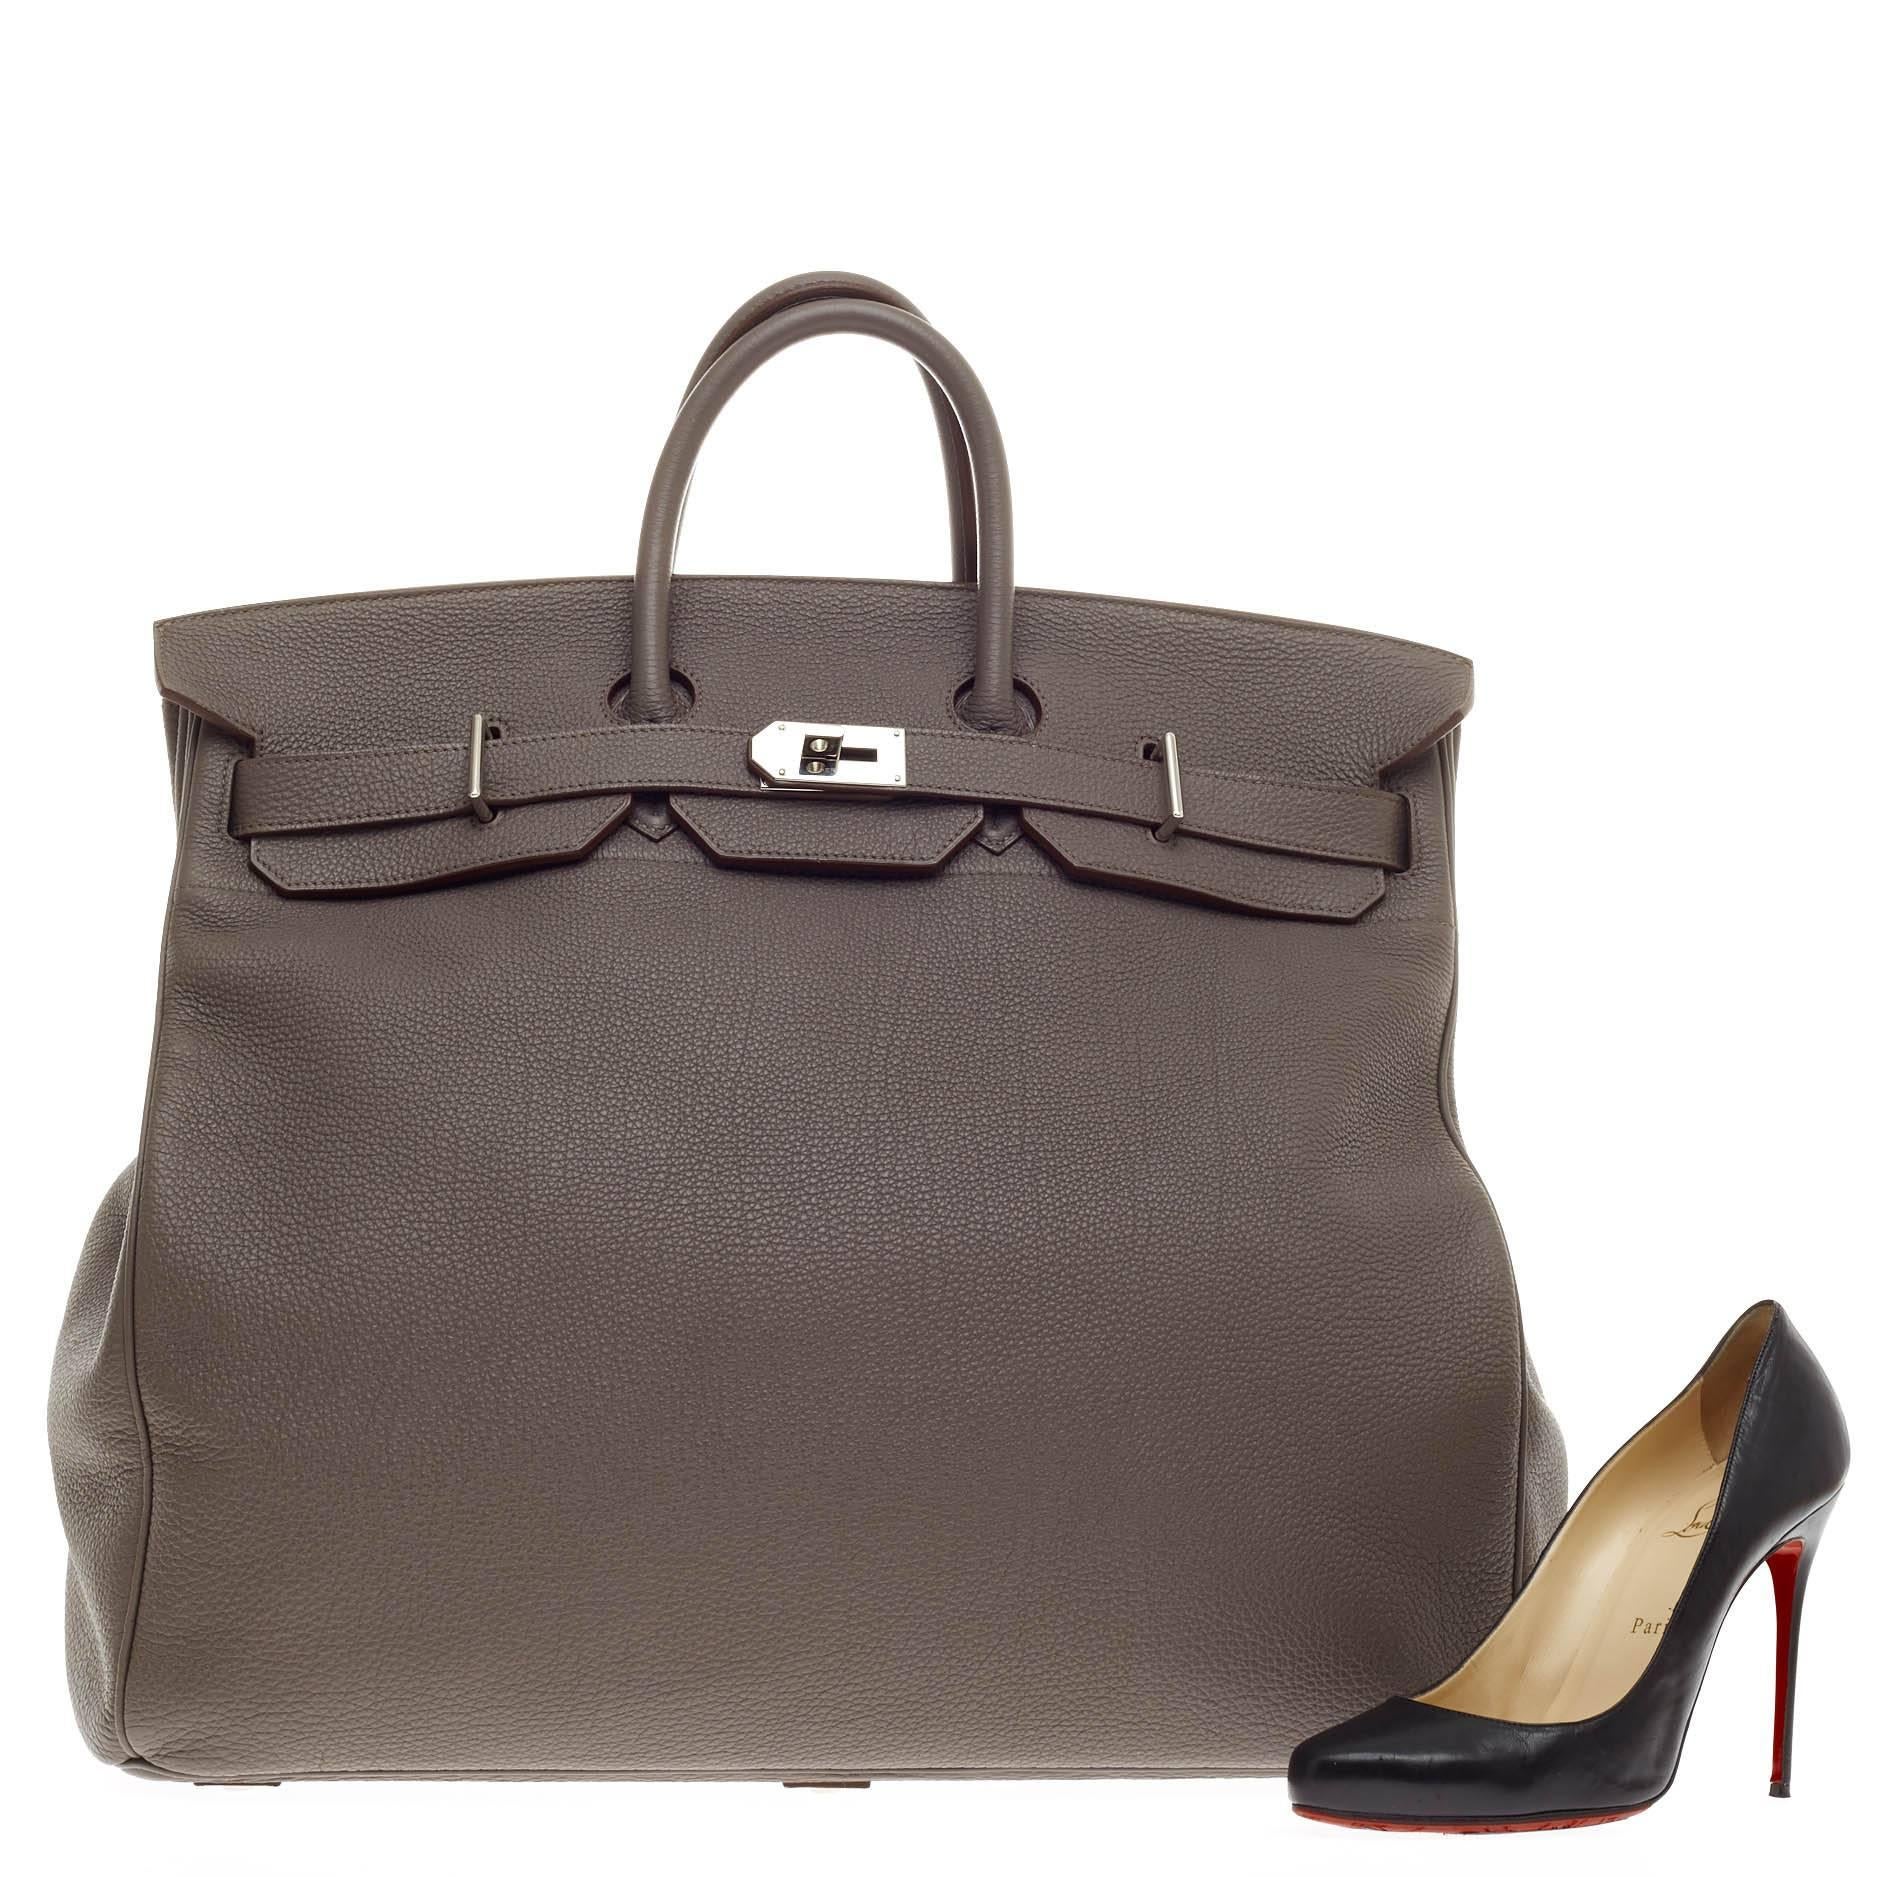 This authentic Hermes Birkin HAC Etain Togo with Palladium Hardware 50 exudes traditional Hermes luxury in coveted, larger-than-life proportions. Crafted in scratch-resistant etain gray togo leather, this unique, hard-to-find birkin HAC modeled